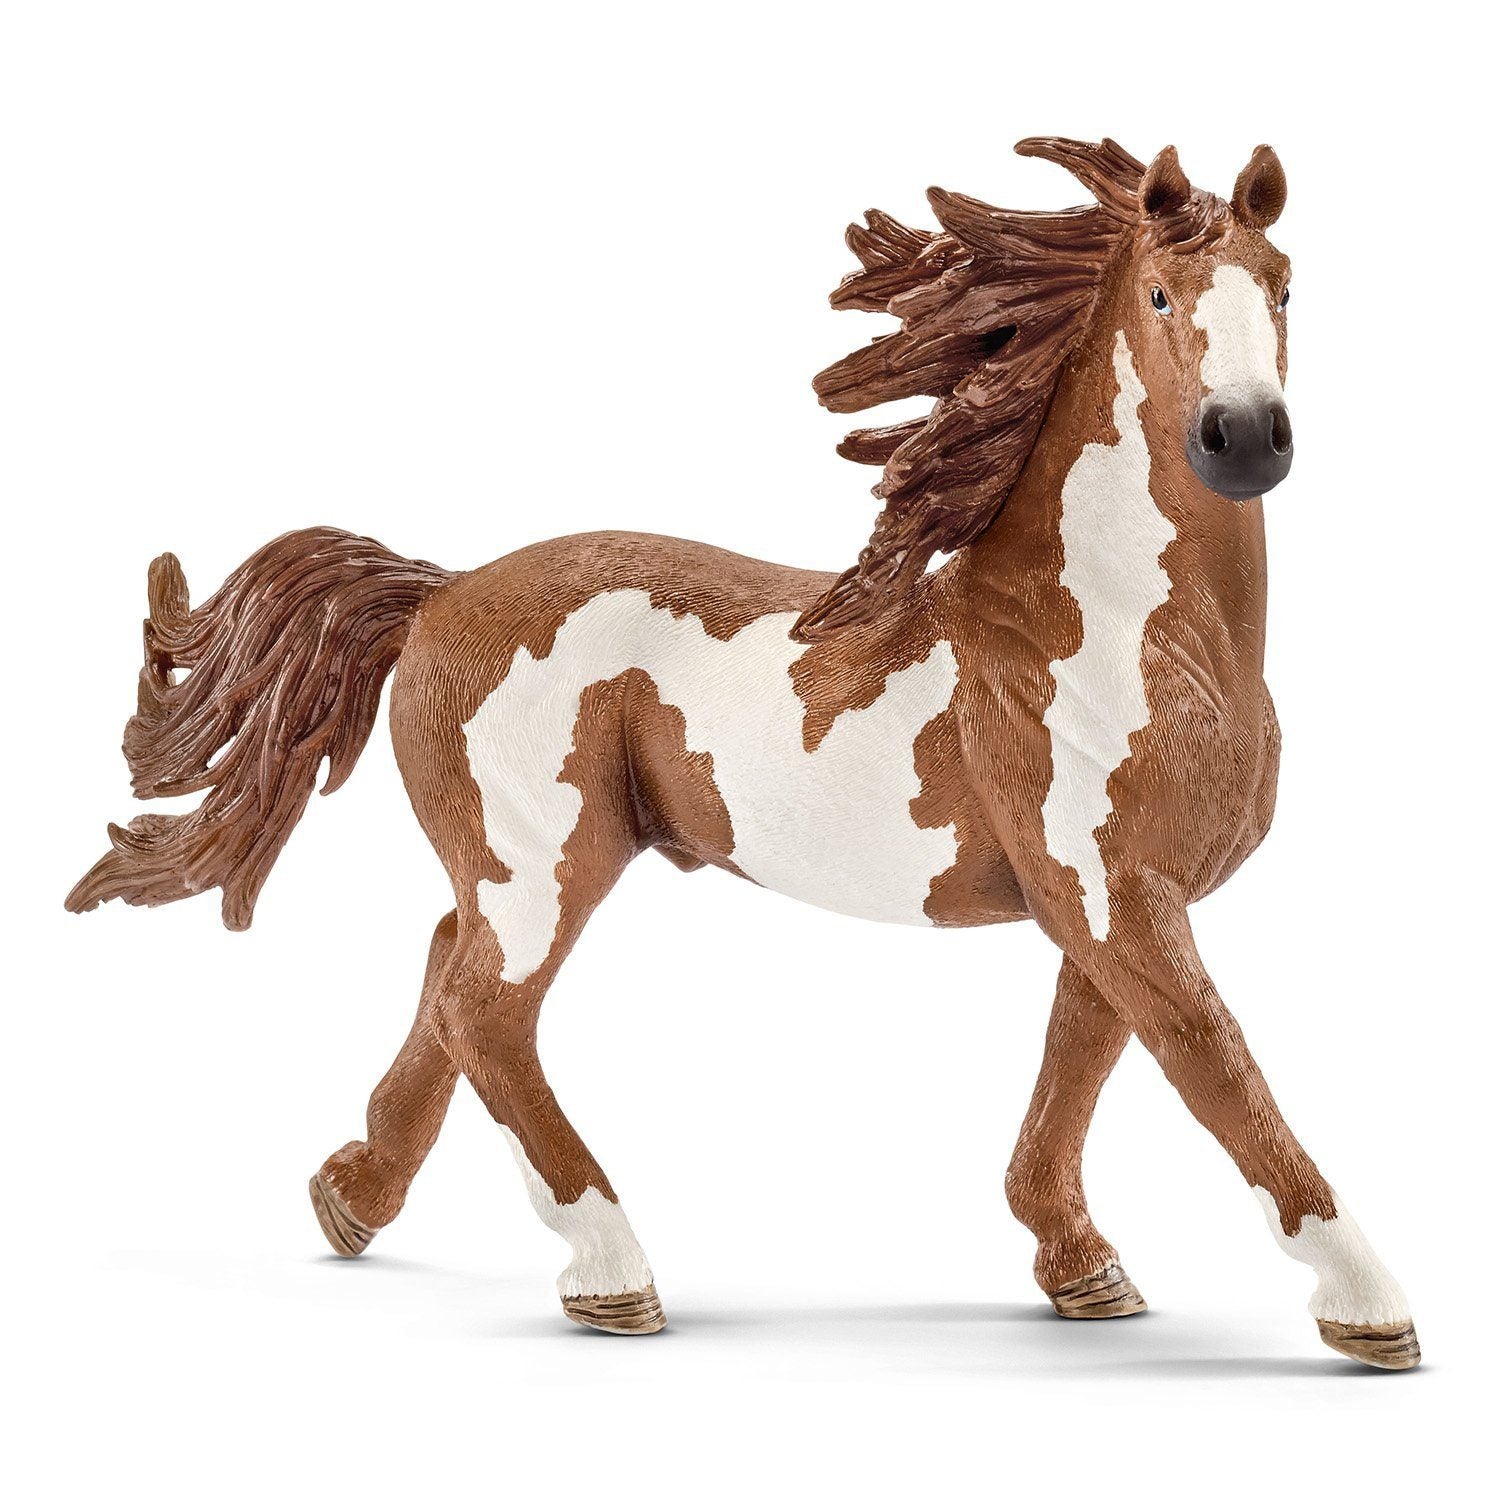 Pinto Stallion plastic figure. The stallion is hand painted with white and brown spots, true to what the pinto stallion looks like. It is built to look like it is running, its mane and tail are blowing in the wind.